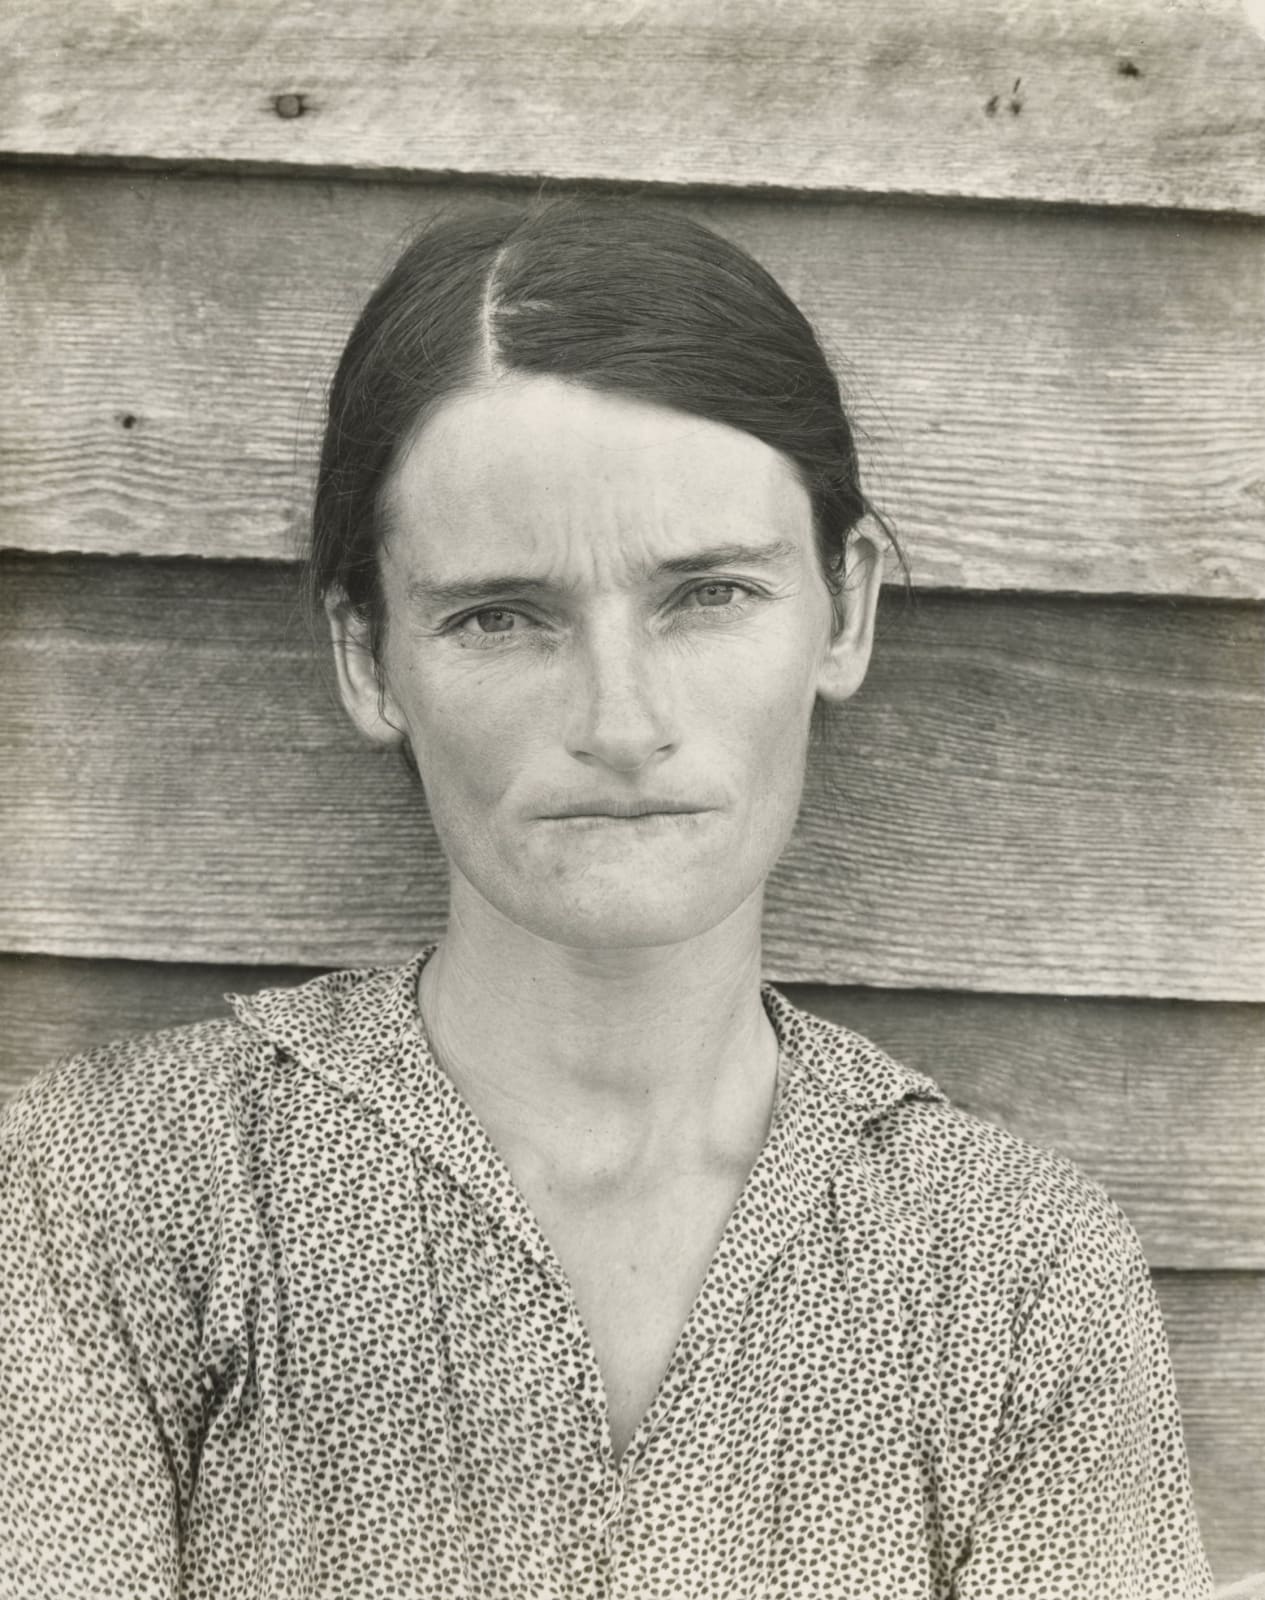 Wife of cotton sharecropper Allie Mae Burroughs standing against wooden slats of her home in Hale County, Alabama by Walker Evans